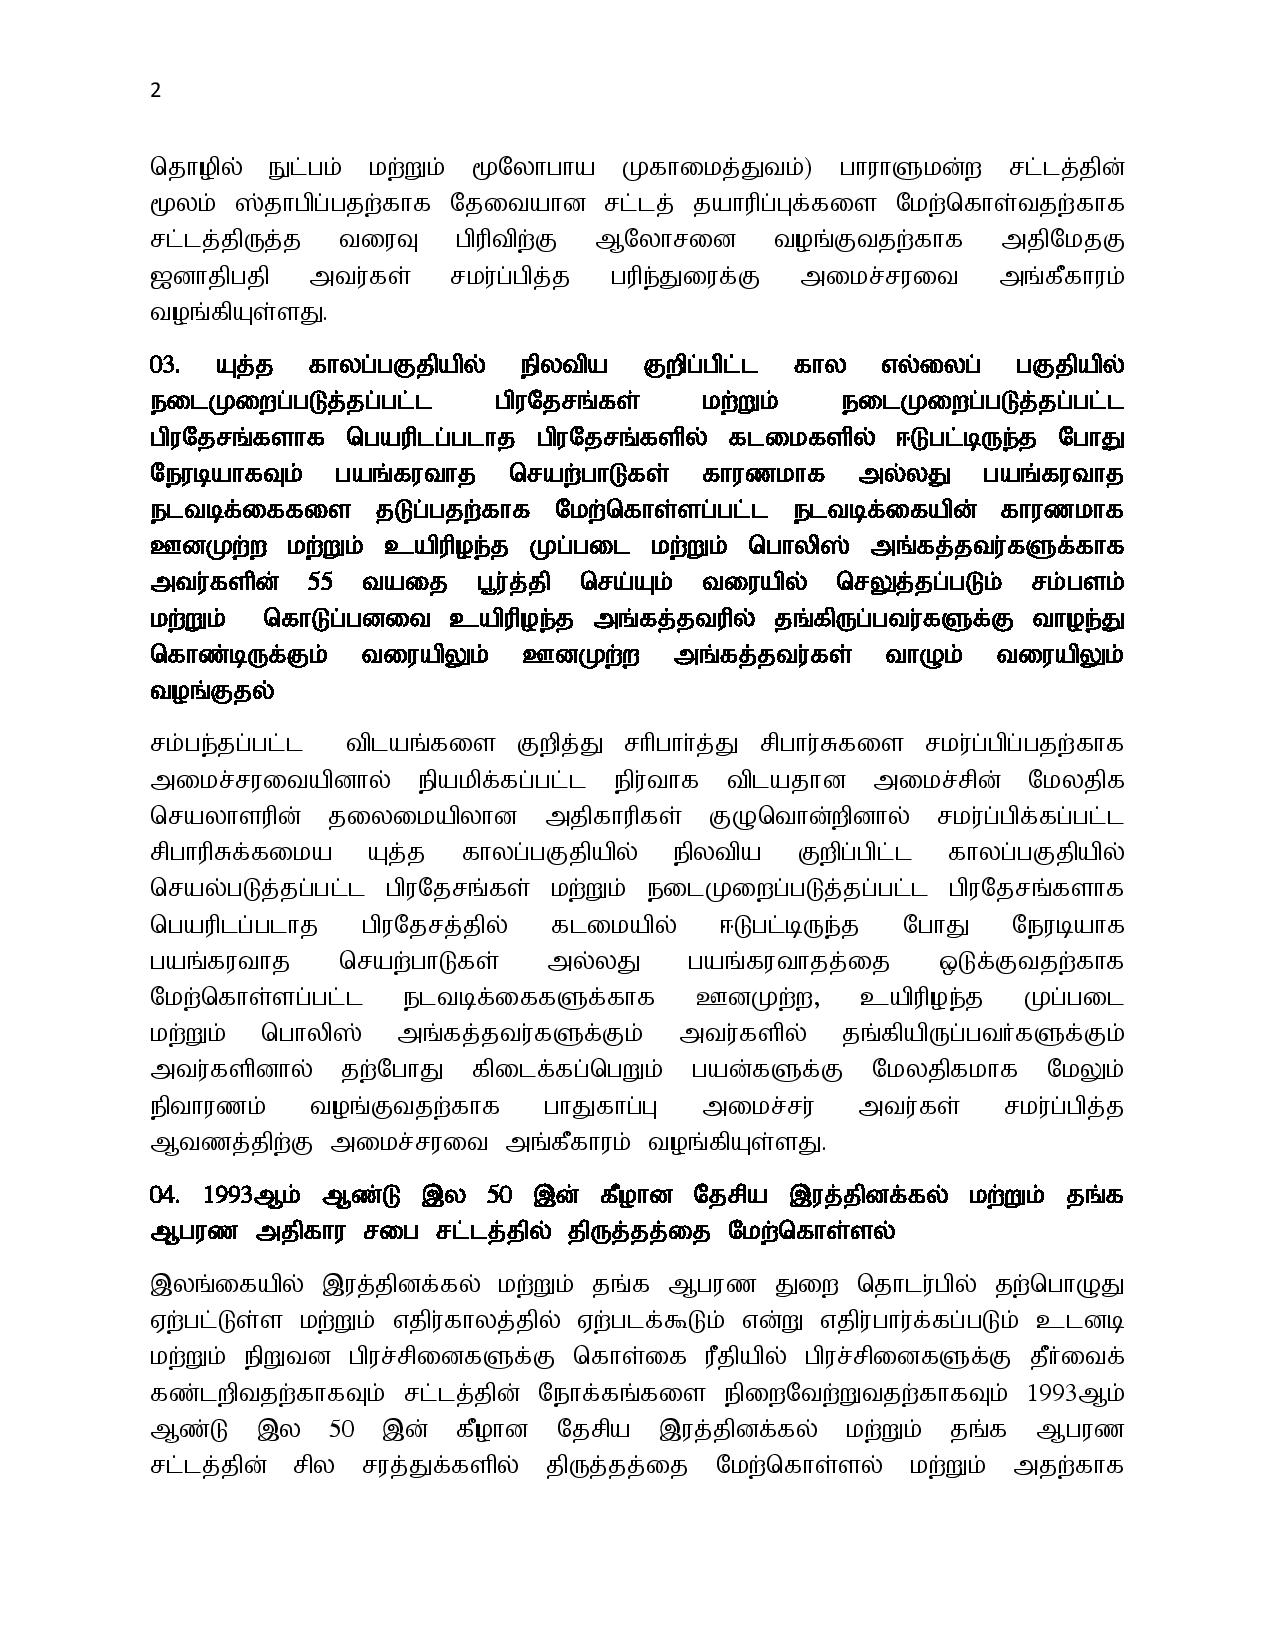 24.09.2019 cabinet page 002